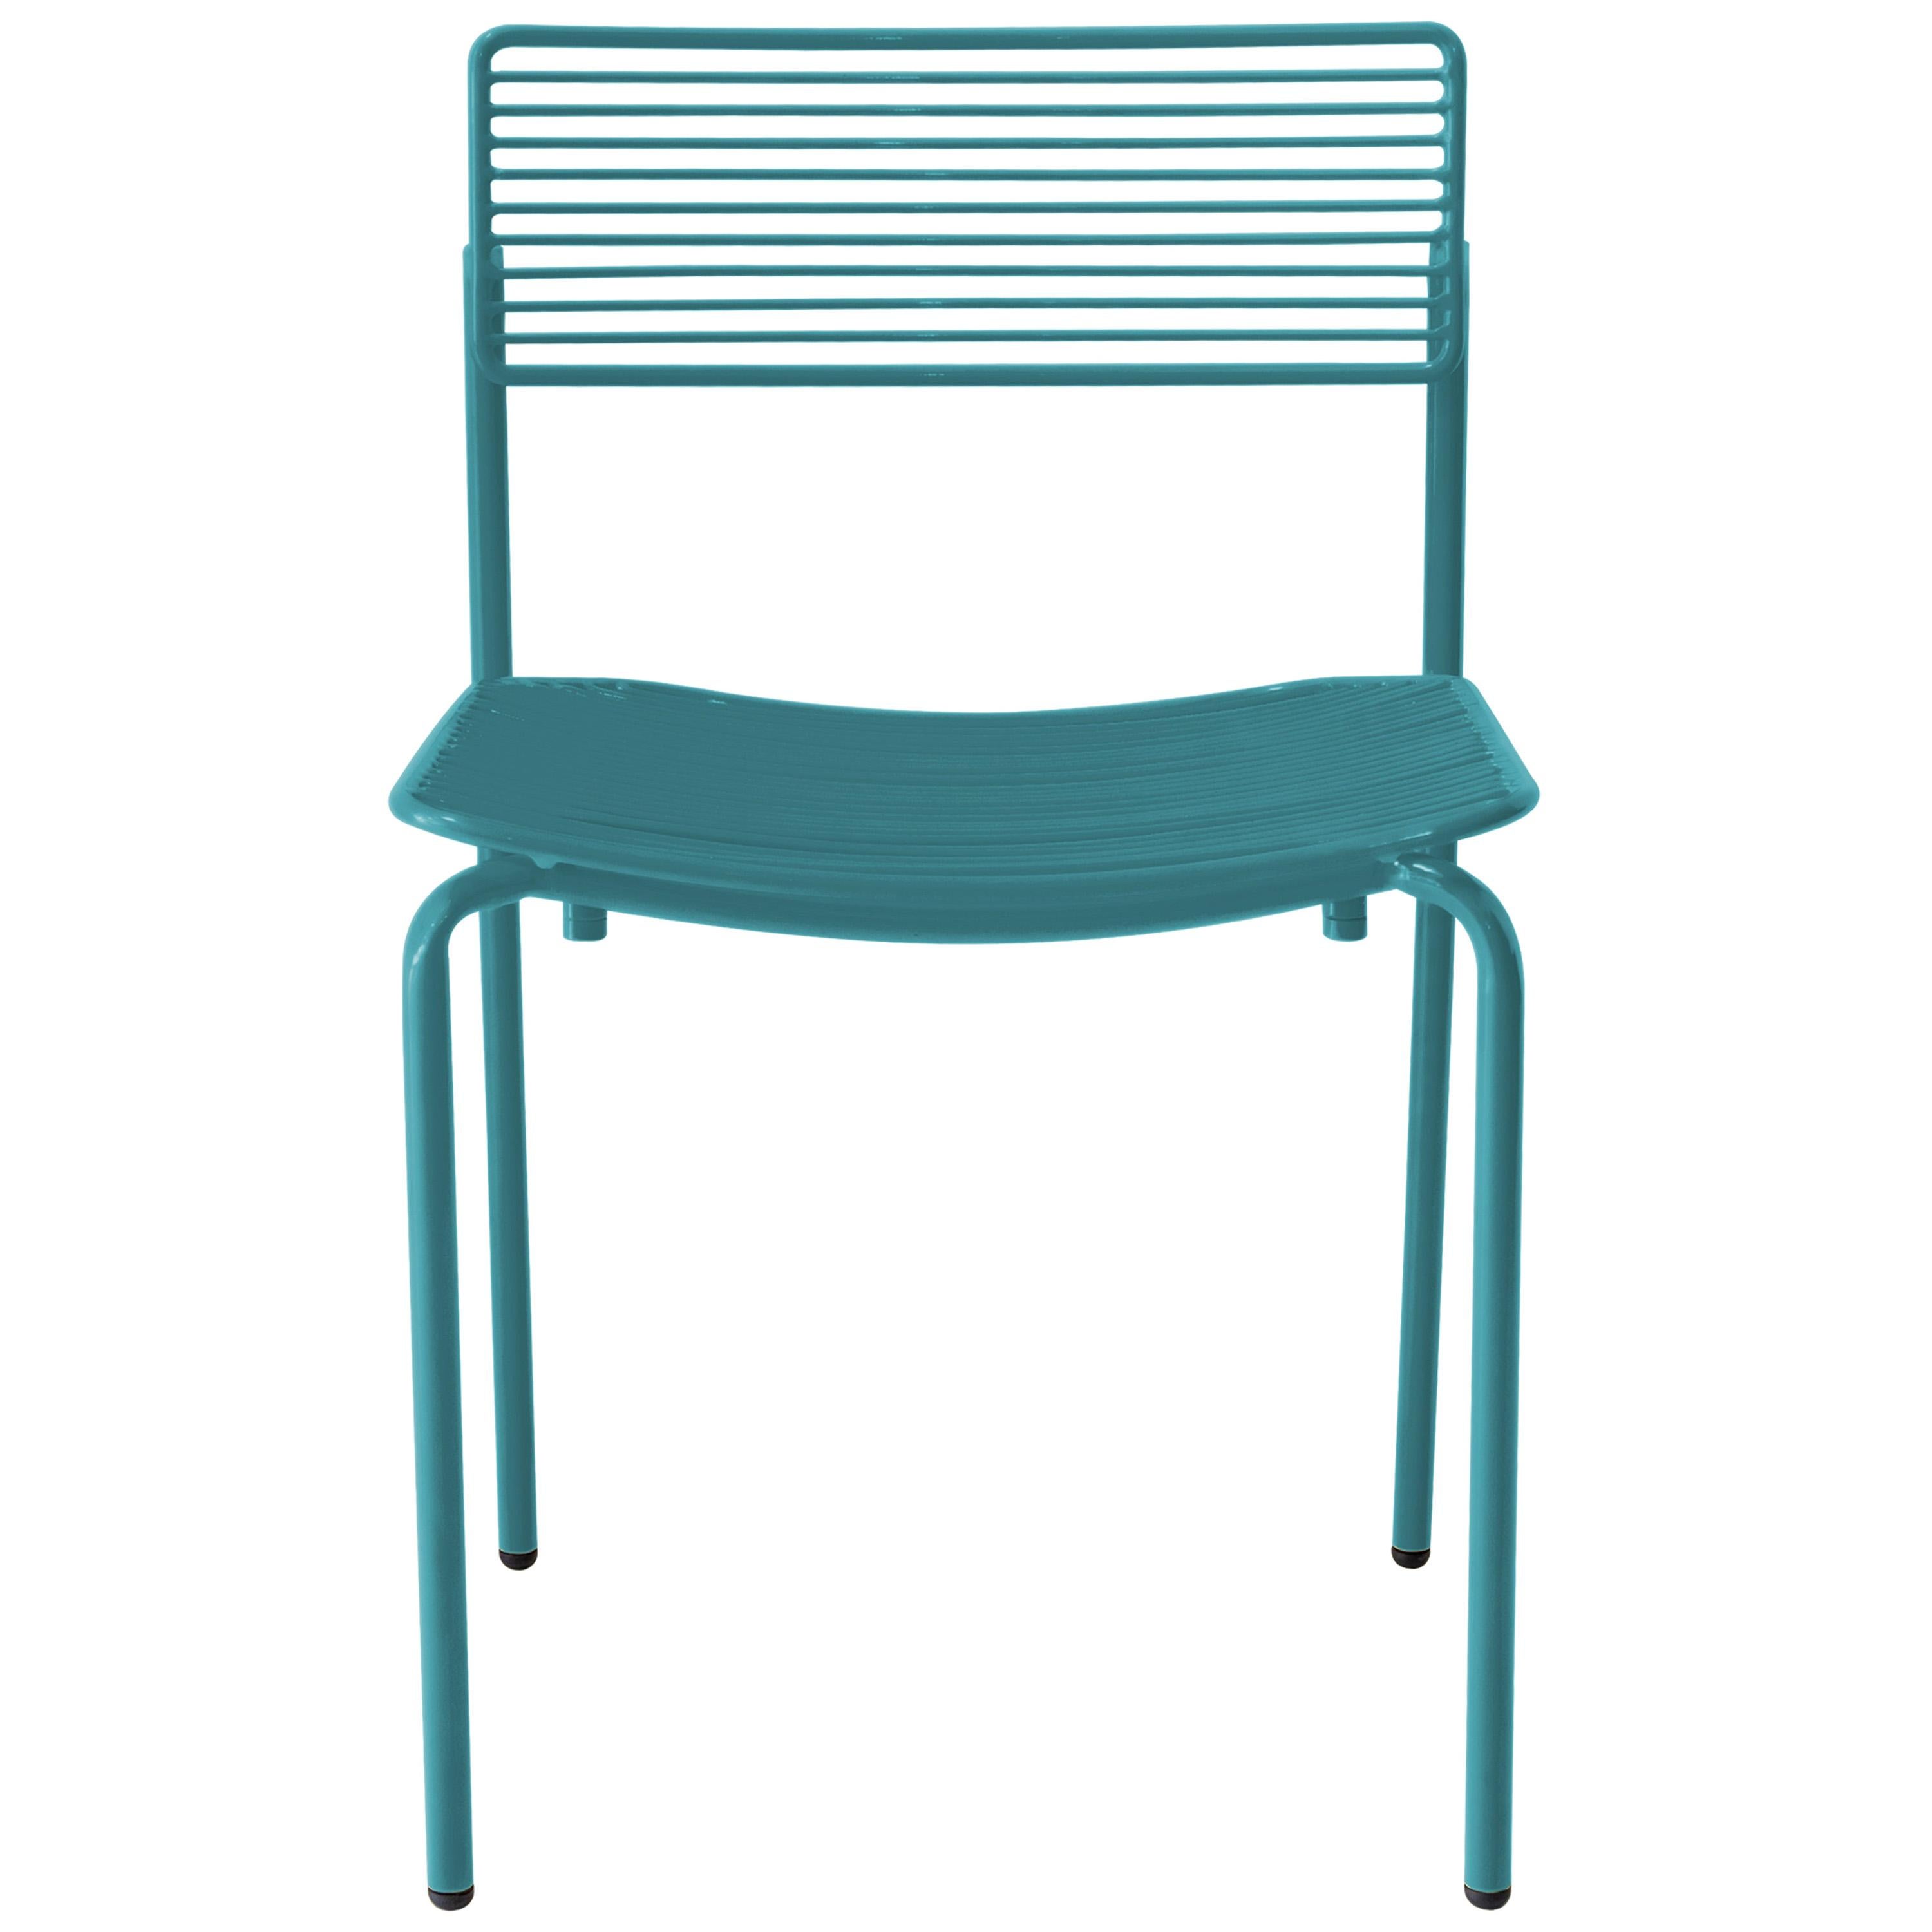 Minimalist Modern Stacking Wire Chair, the Stacking Rachel Chair in Peacock Blue